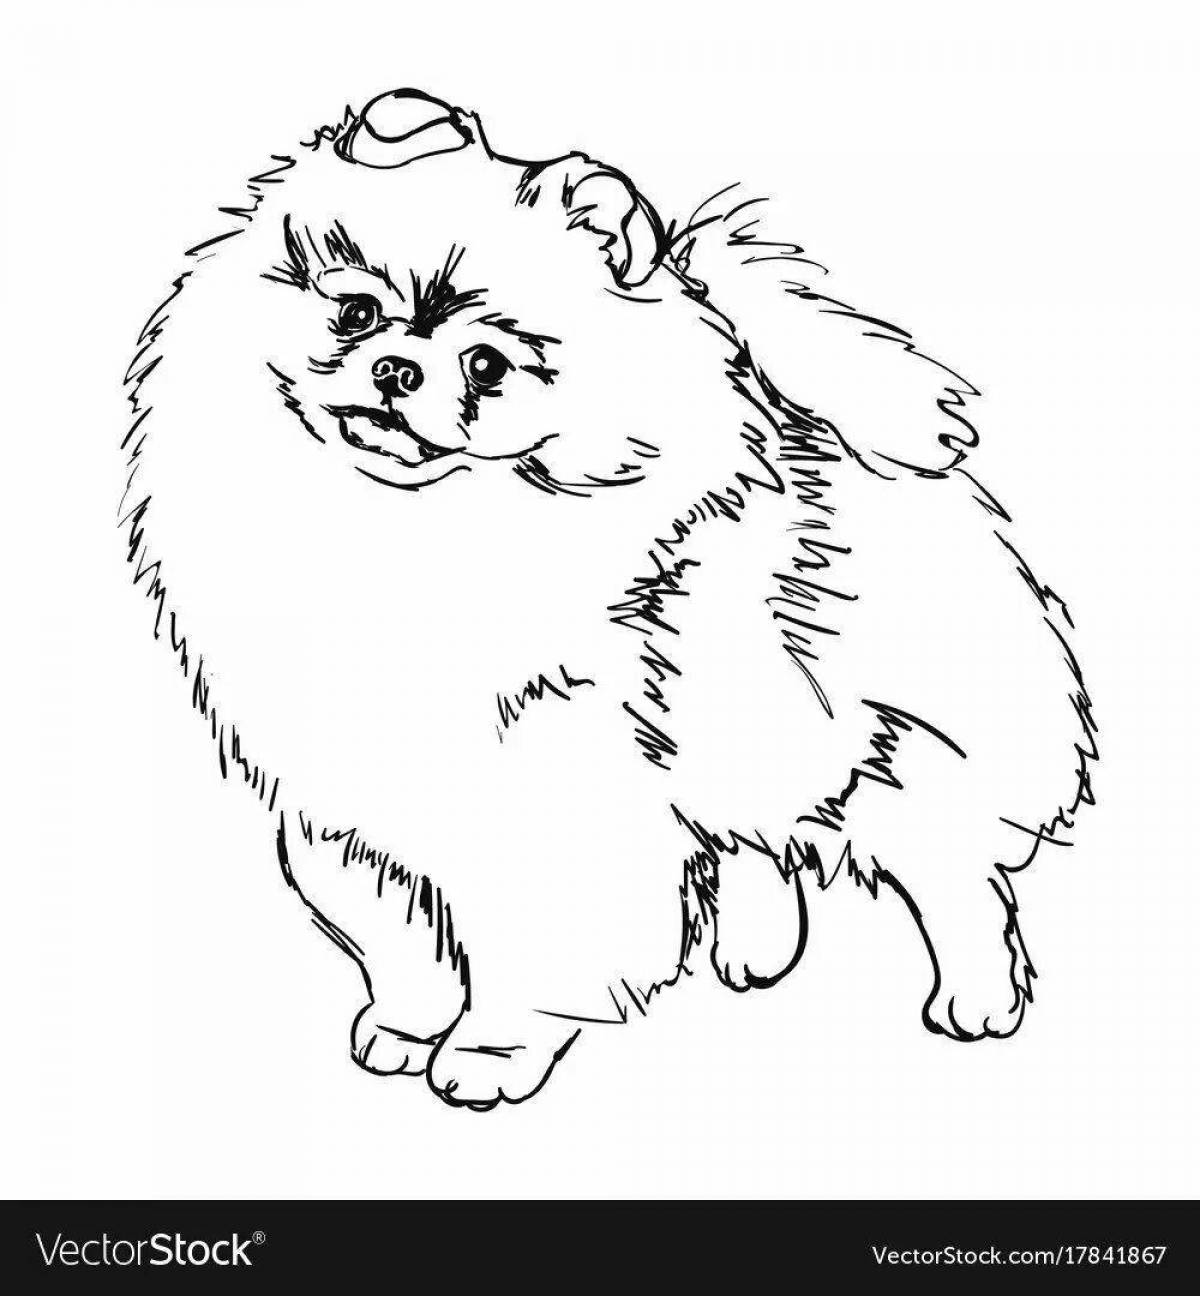 Drawing of a glowing spitz